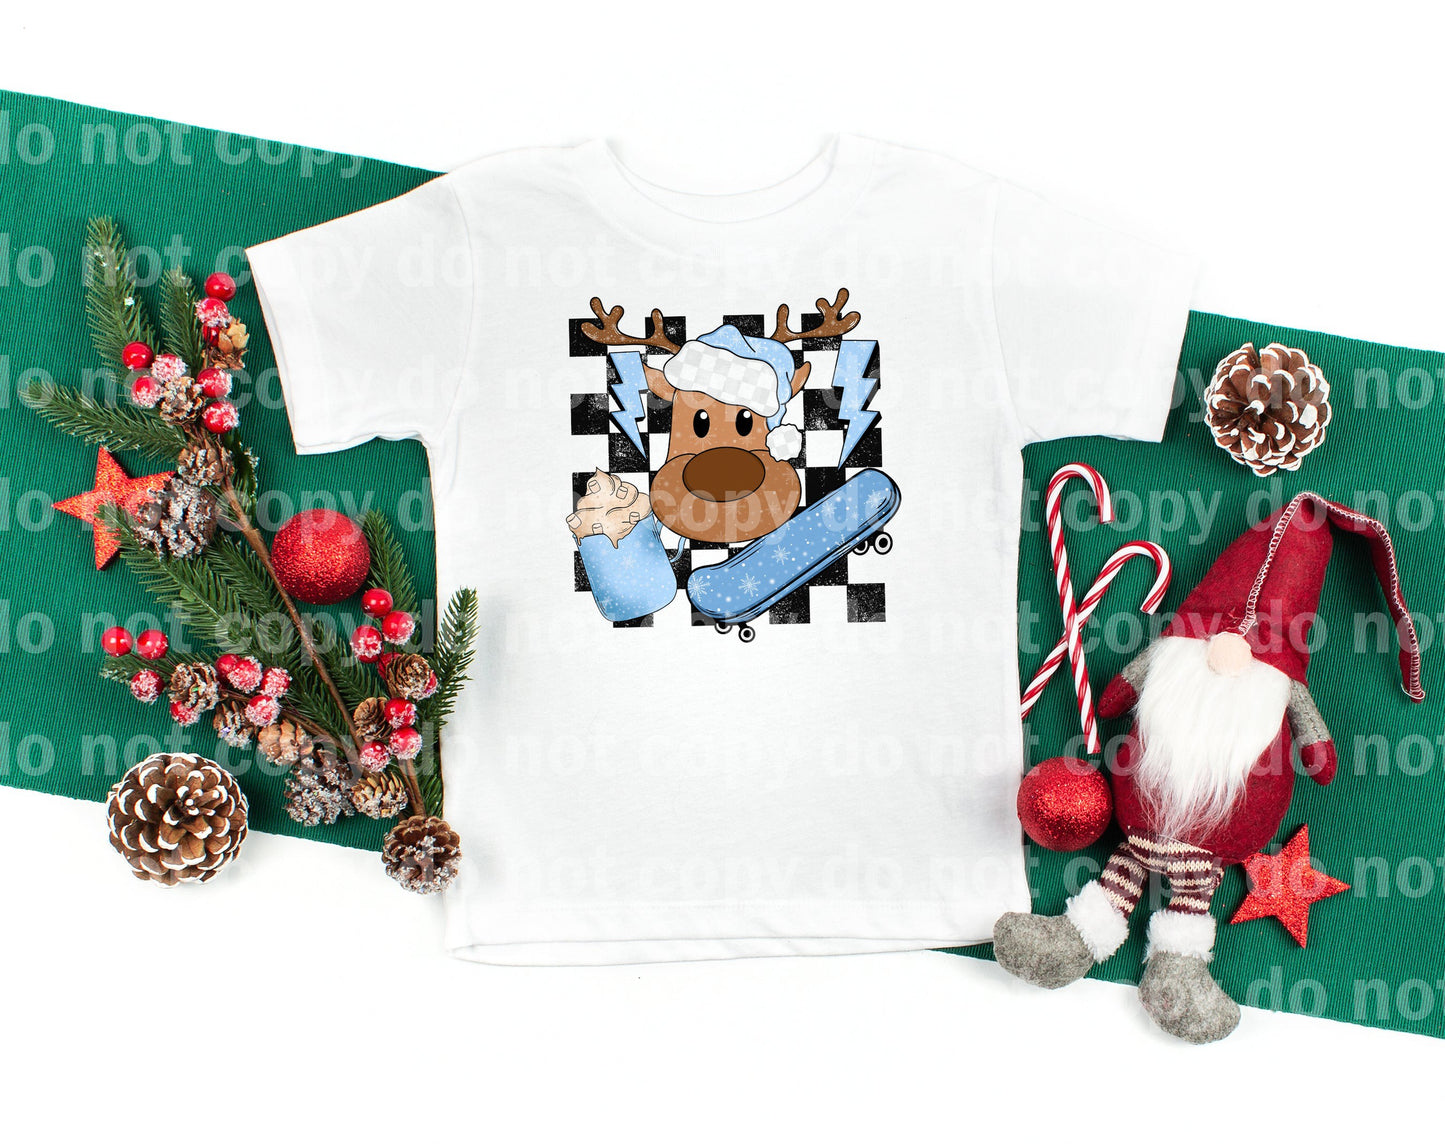 Blue Reindeer Checkered with Pocket Option Dream Print or Sublimation Print